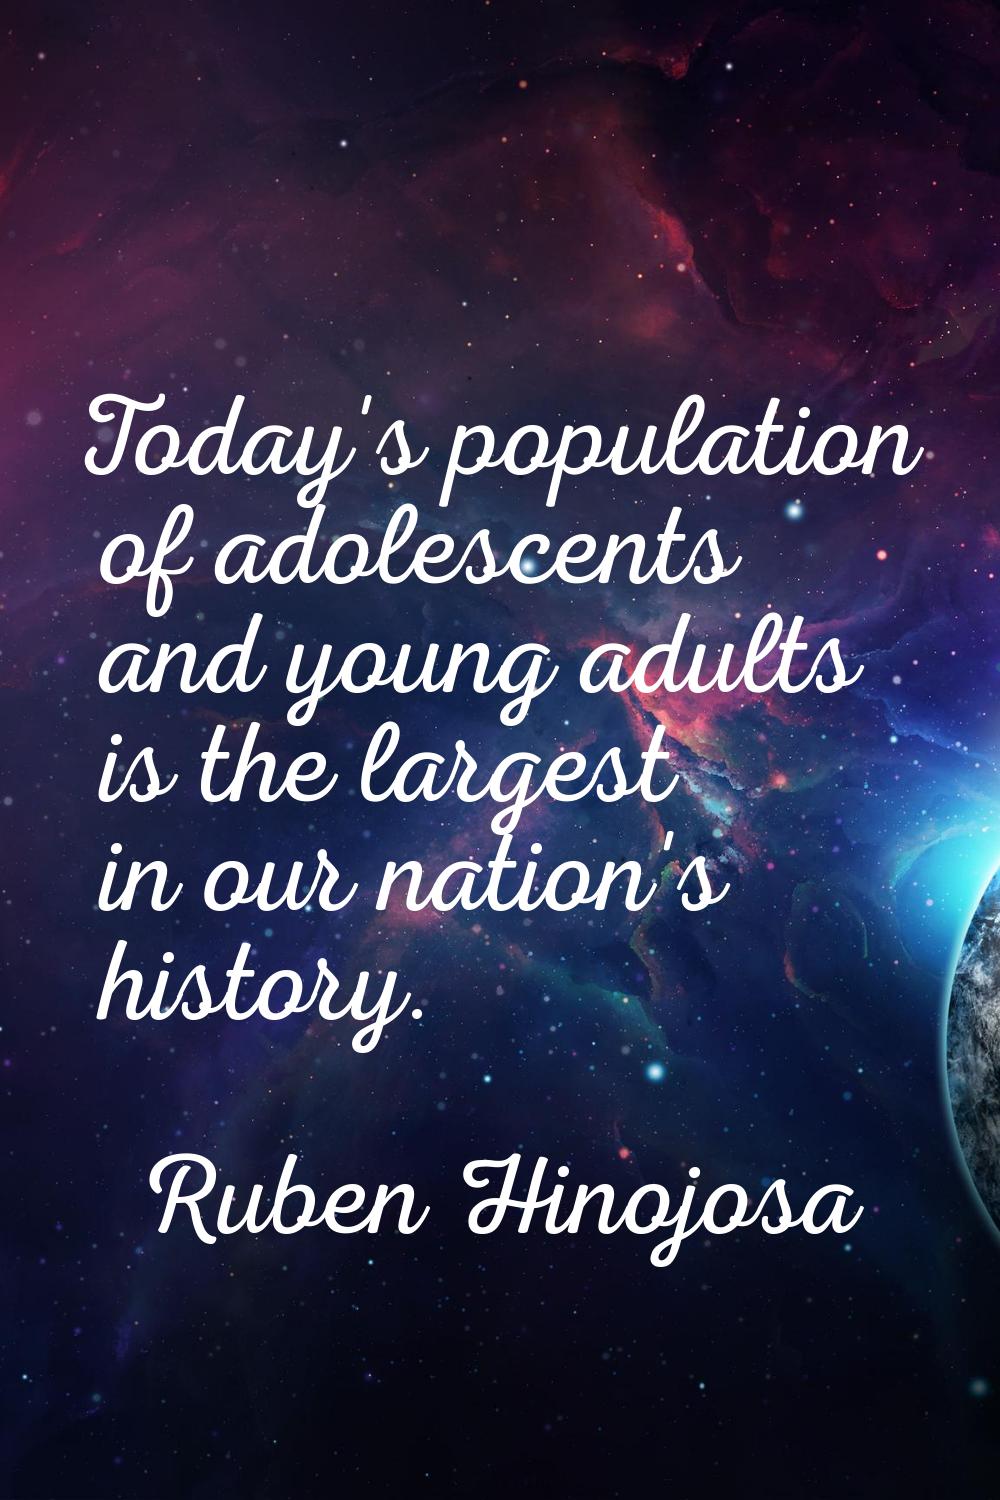 Today's population of adolescents and young adults is the largest in our nation's history.